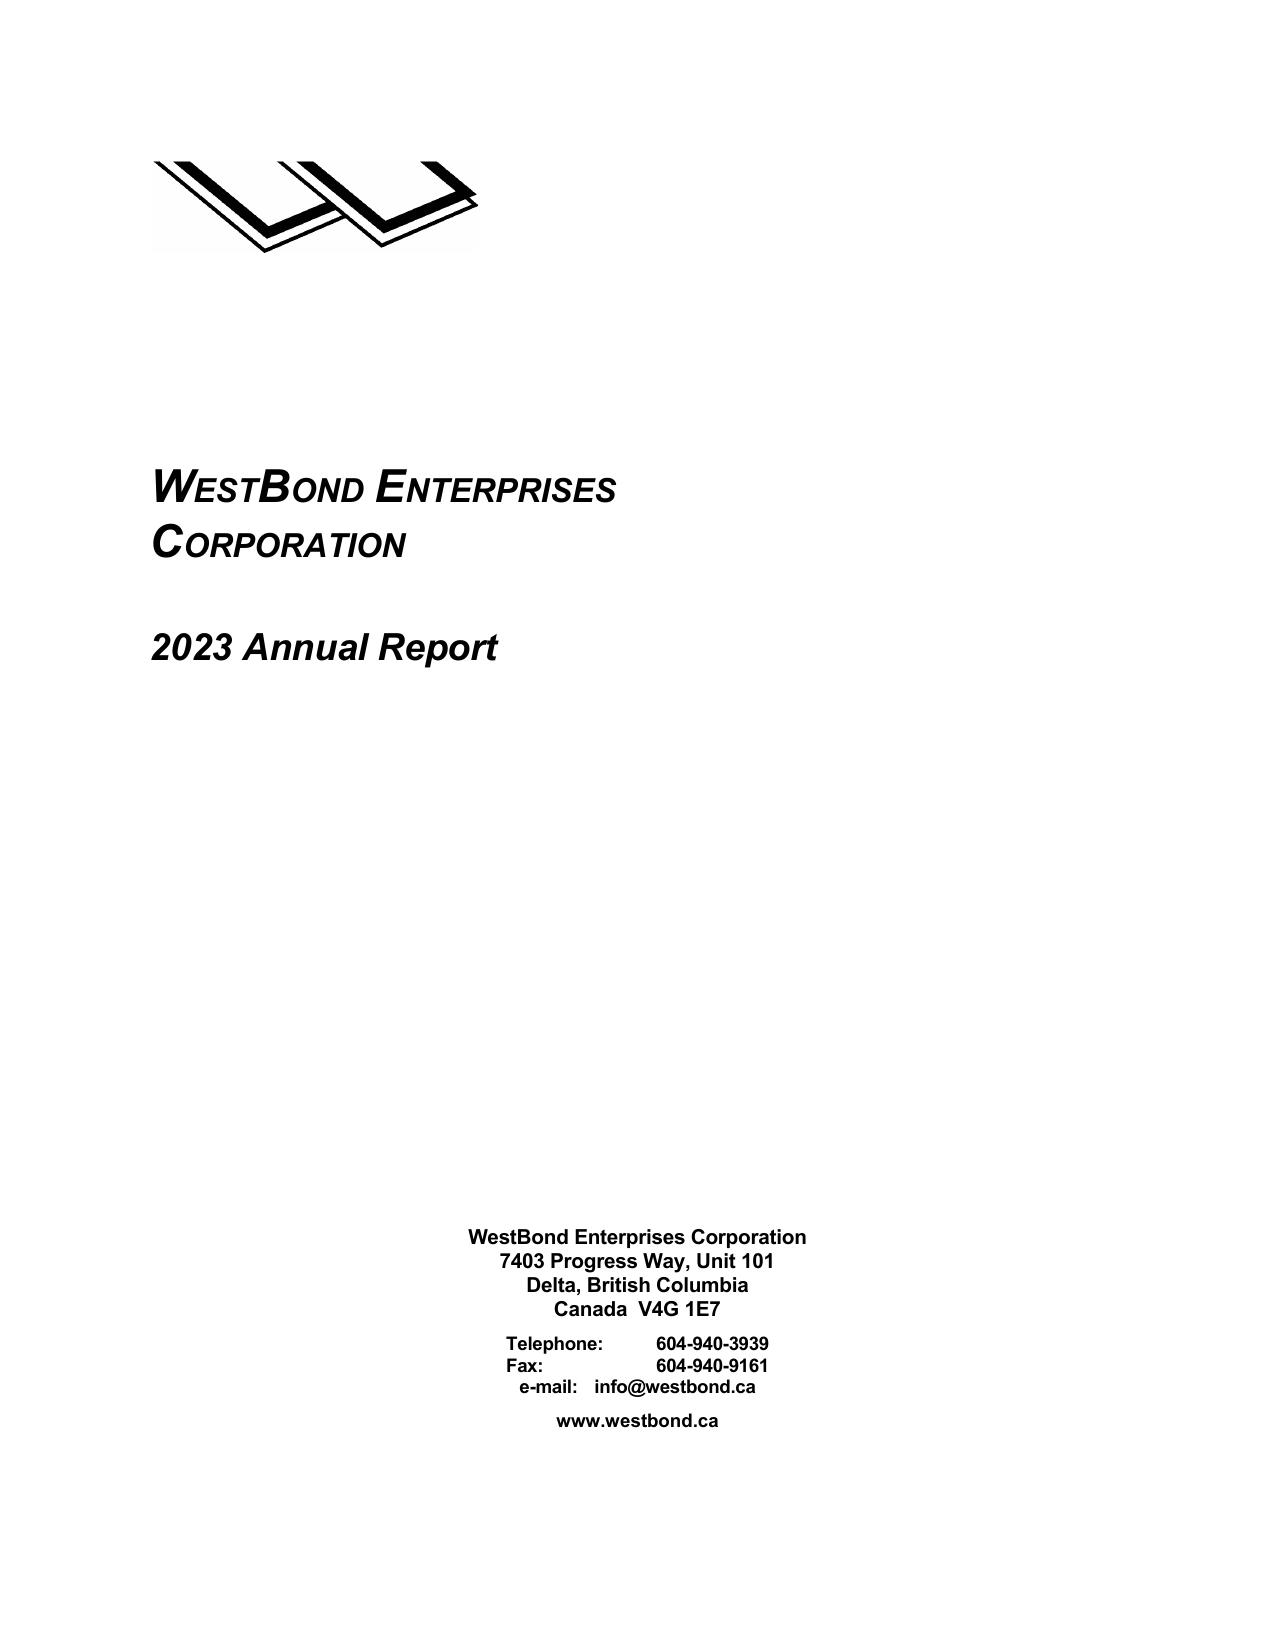 WESTBOND 2023 Annual Report